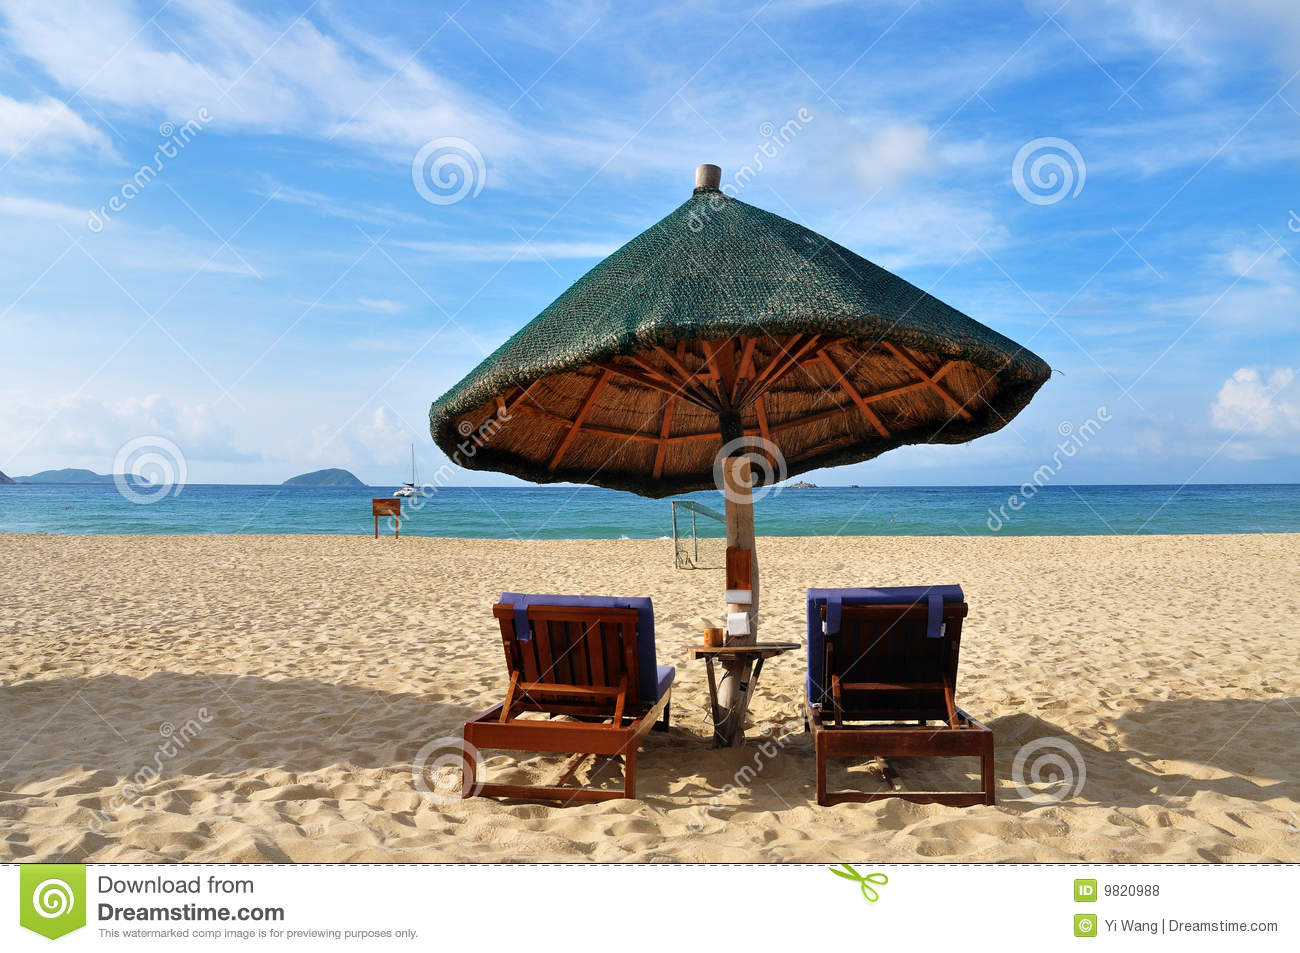 Beach Umbrella And Chairs Royalty Free Stock Photos   Image  9820988